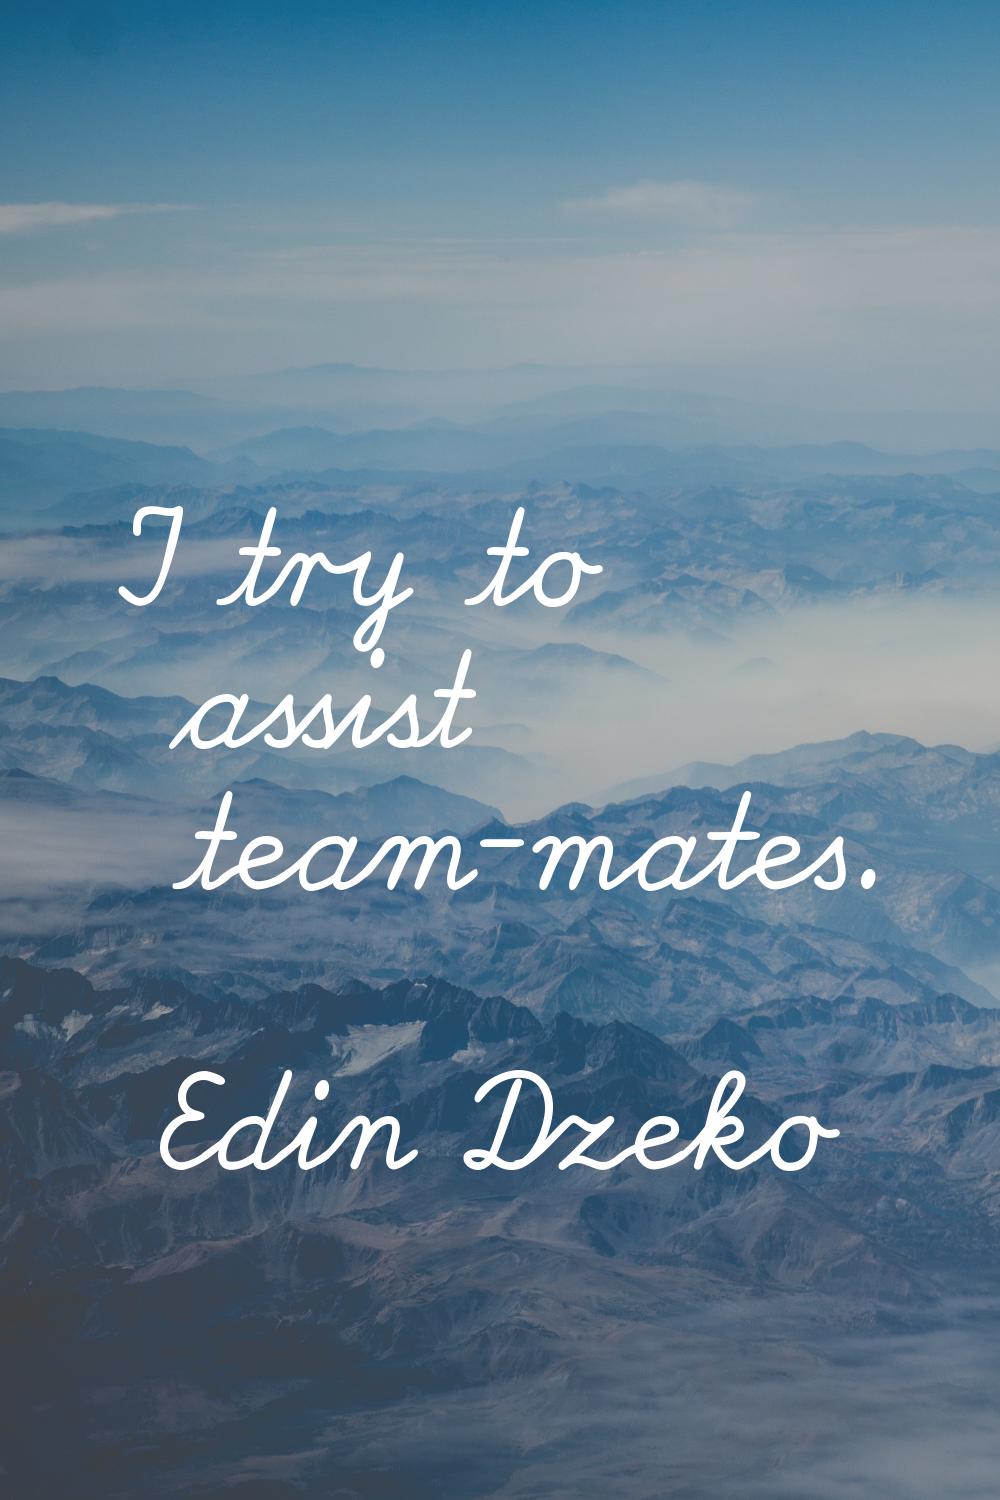 I try to assist team-mates.